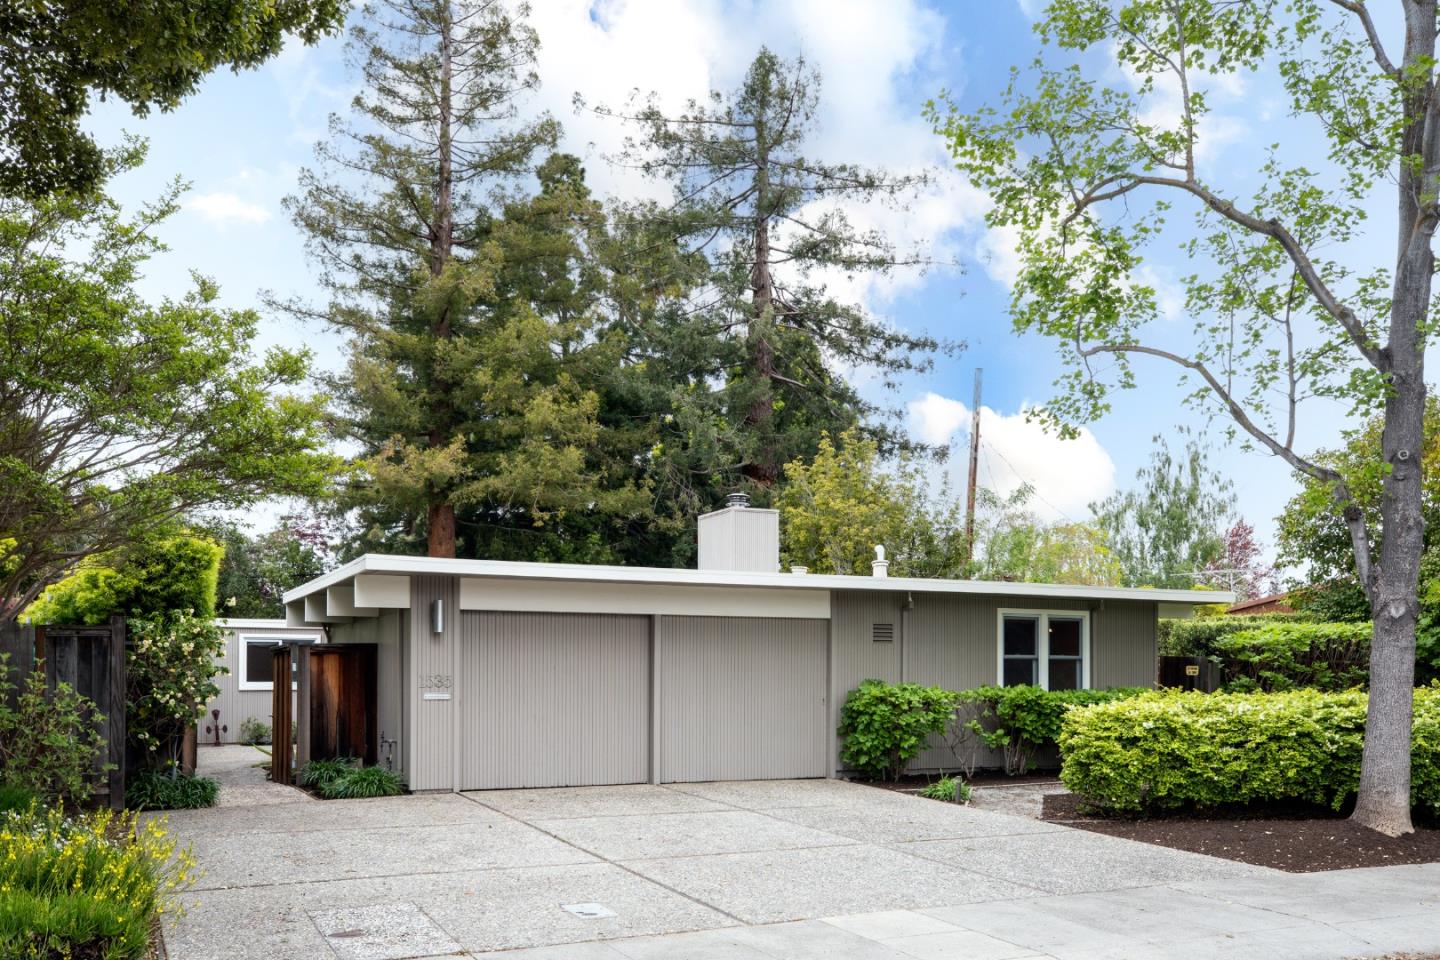 Photo of 1535 Channing Ave in Palo Alto, CA